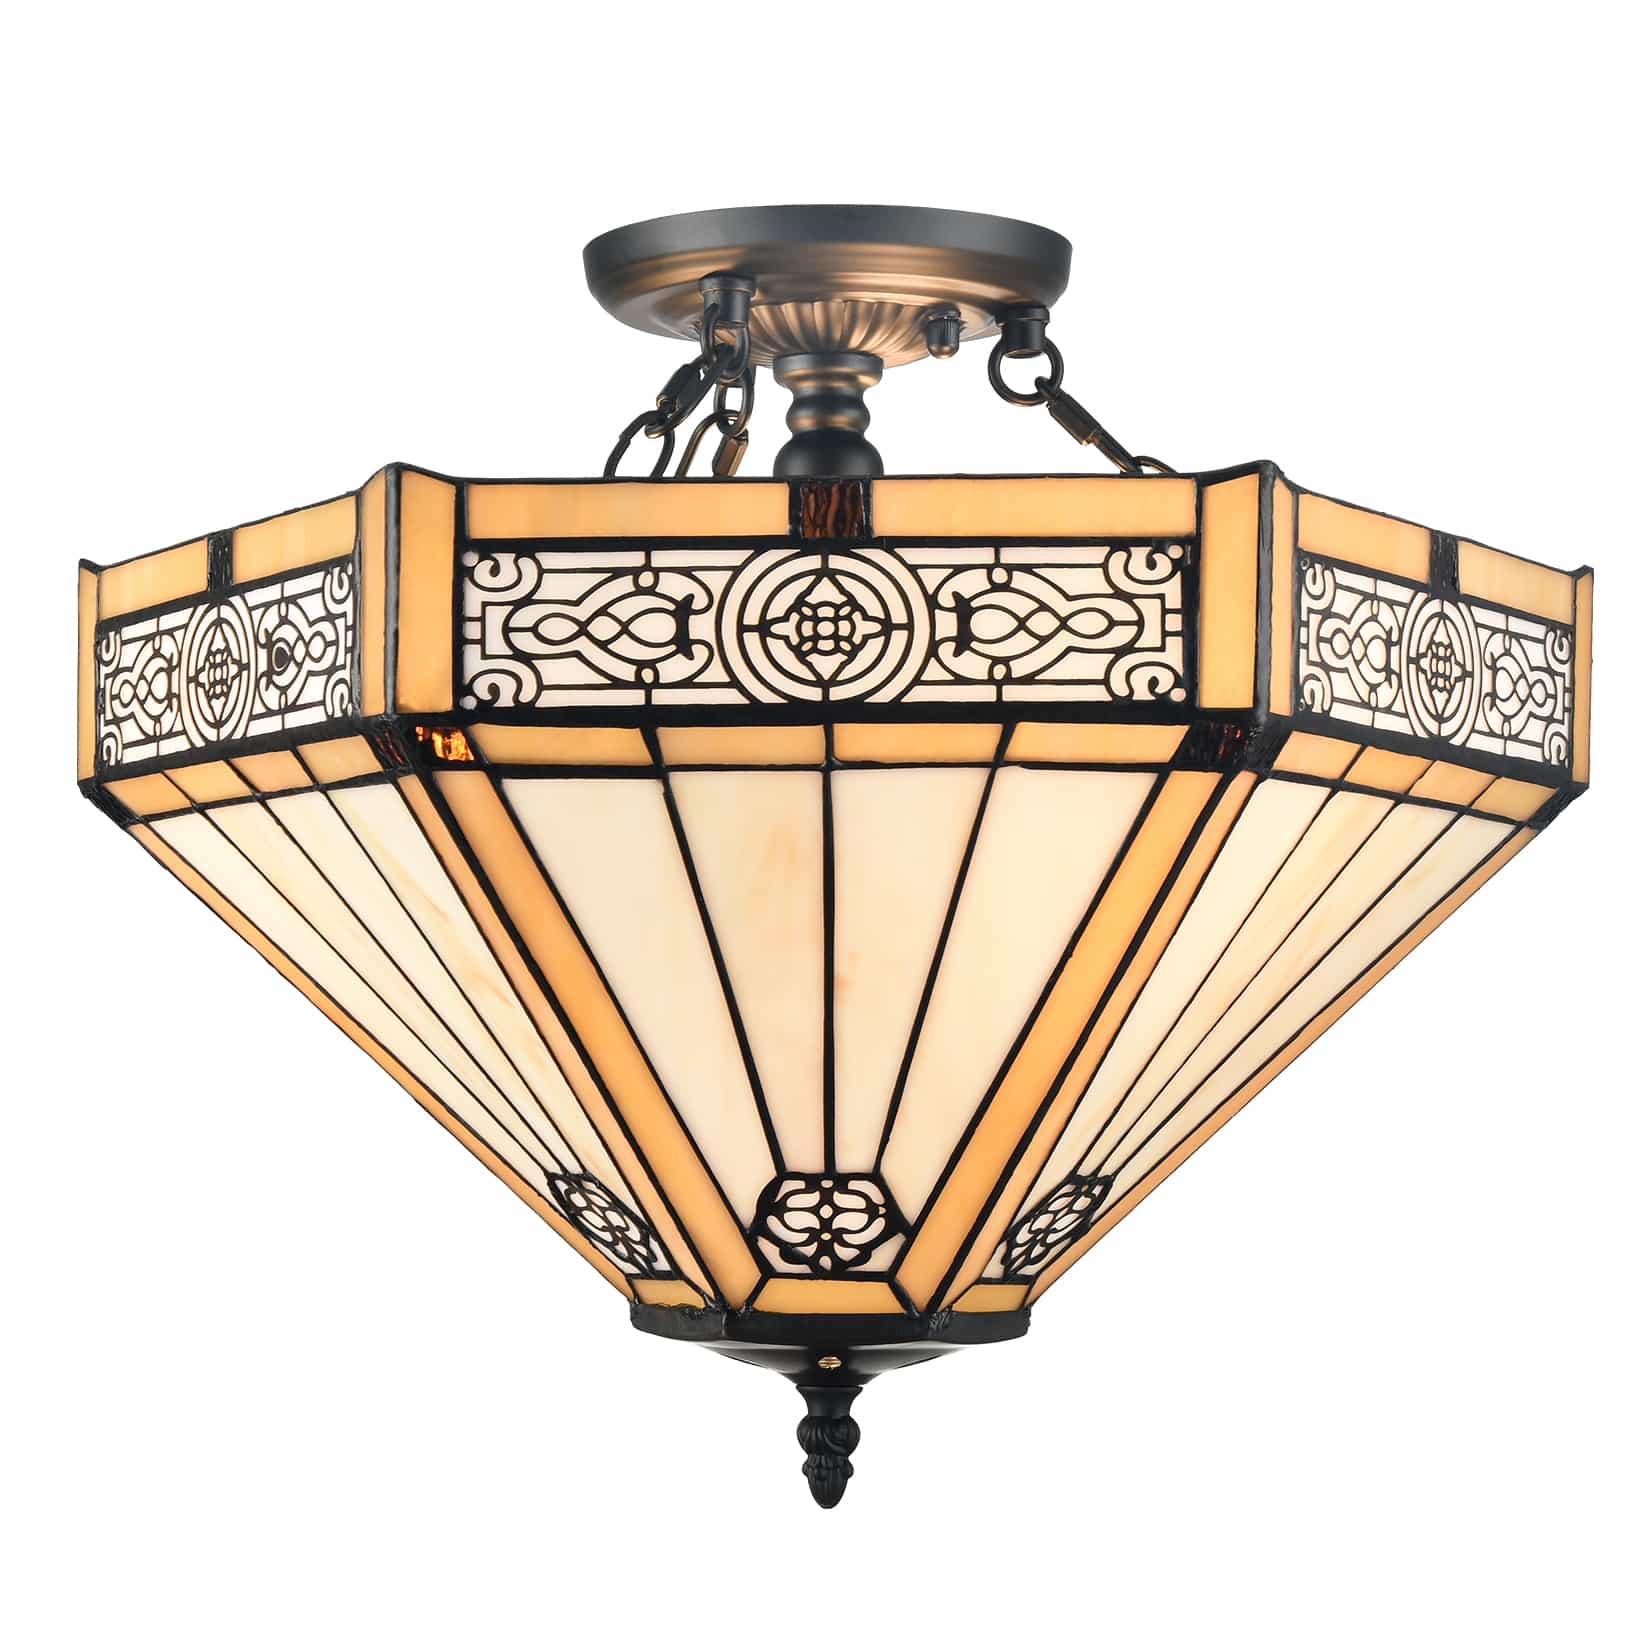 Tiffany Style Ceiling Light Stained Glass Semi Flush Mount Light